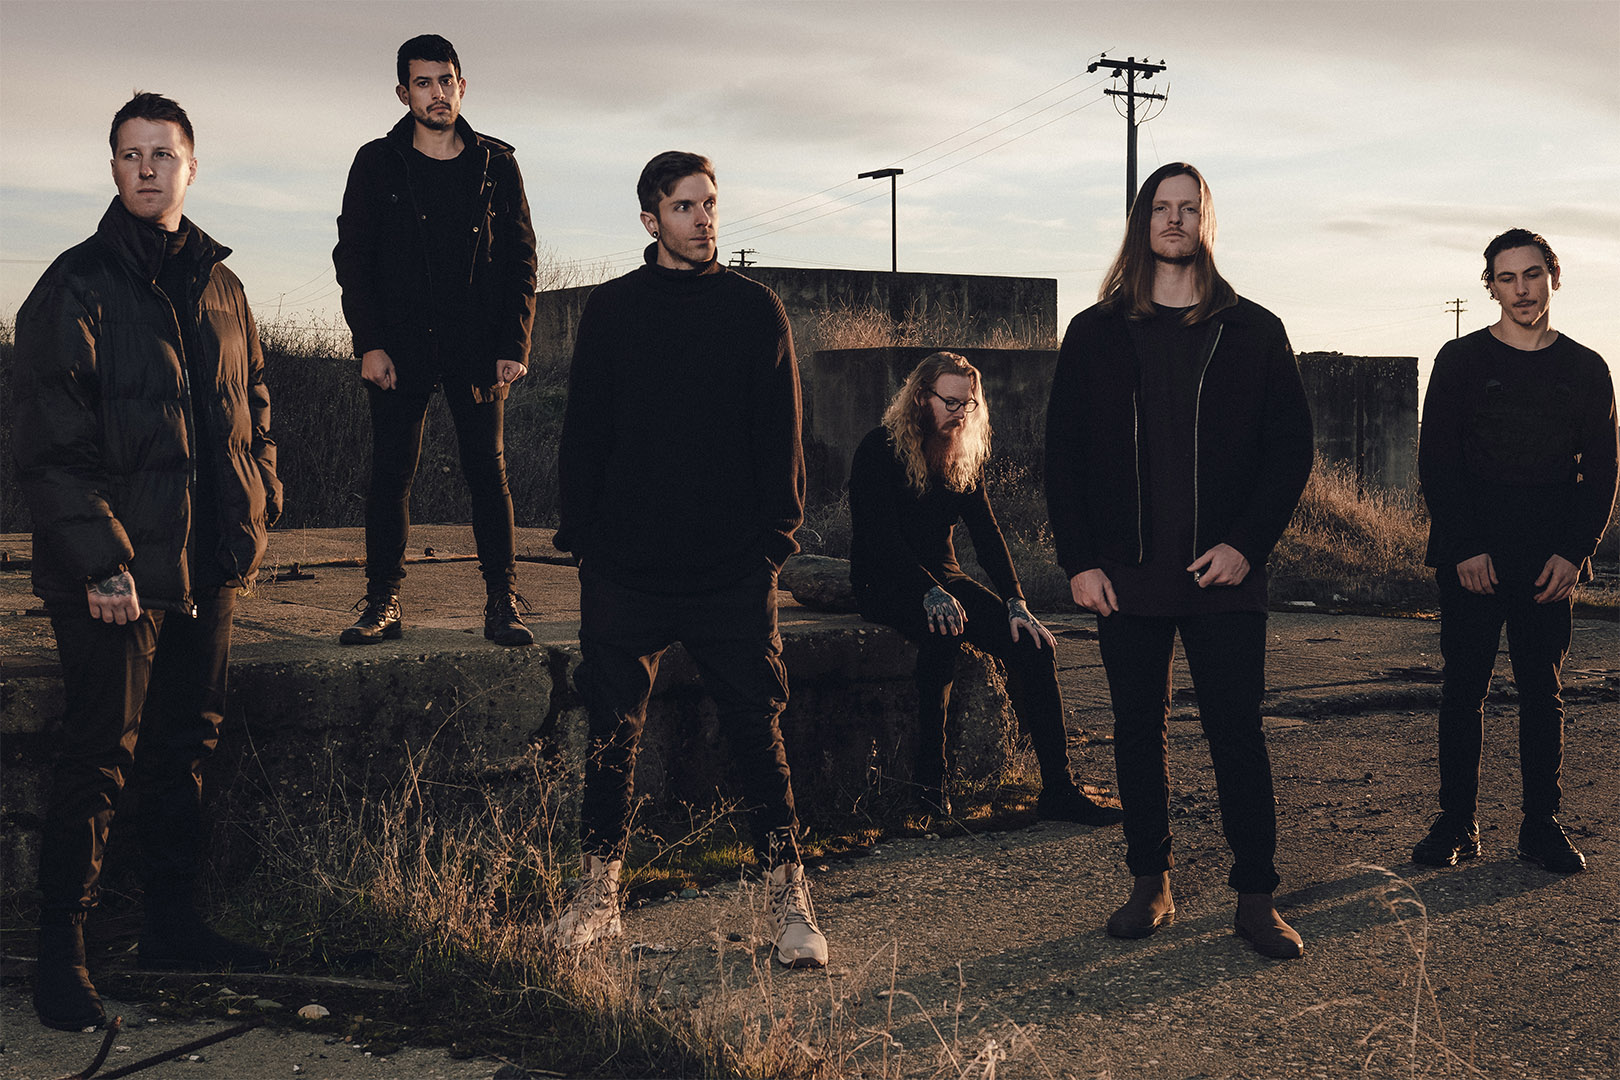 EXCLUSIVE: KINGDOM OF GIANTS INTERVIEW “NOT JUST KOG, THE INVOGUE RECORDS BAND ANYMORE”